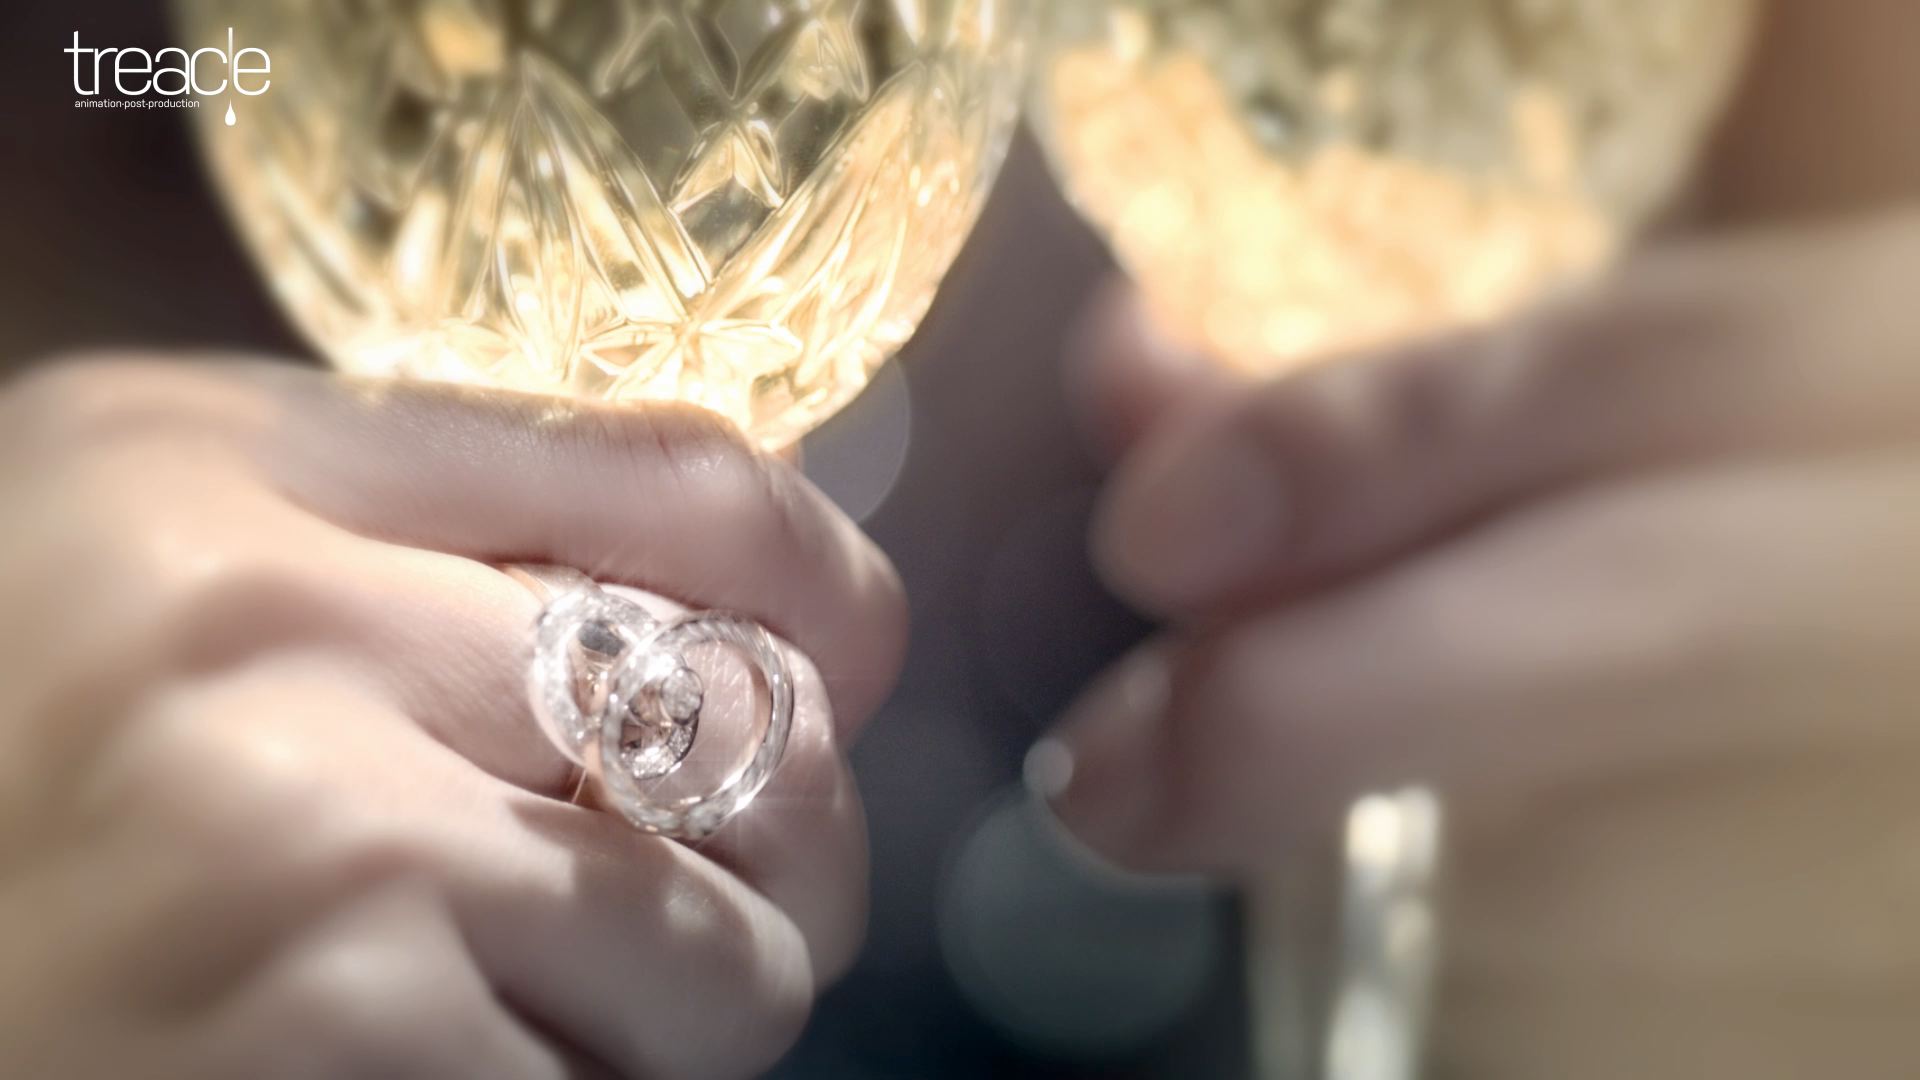 Close-up of a diamond ring on a woman's hand holding a champagne glass.